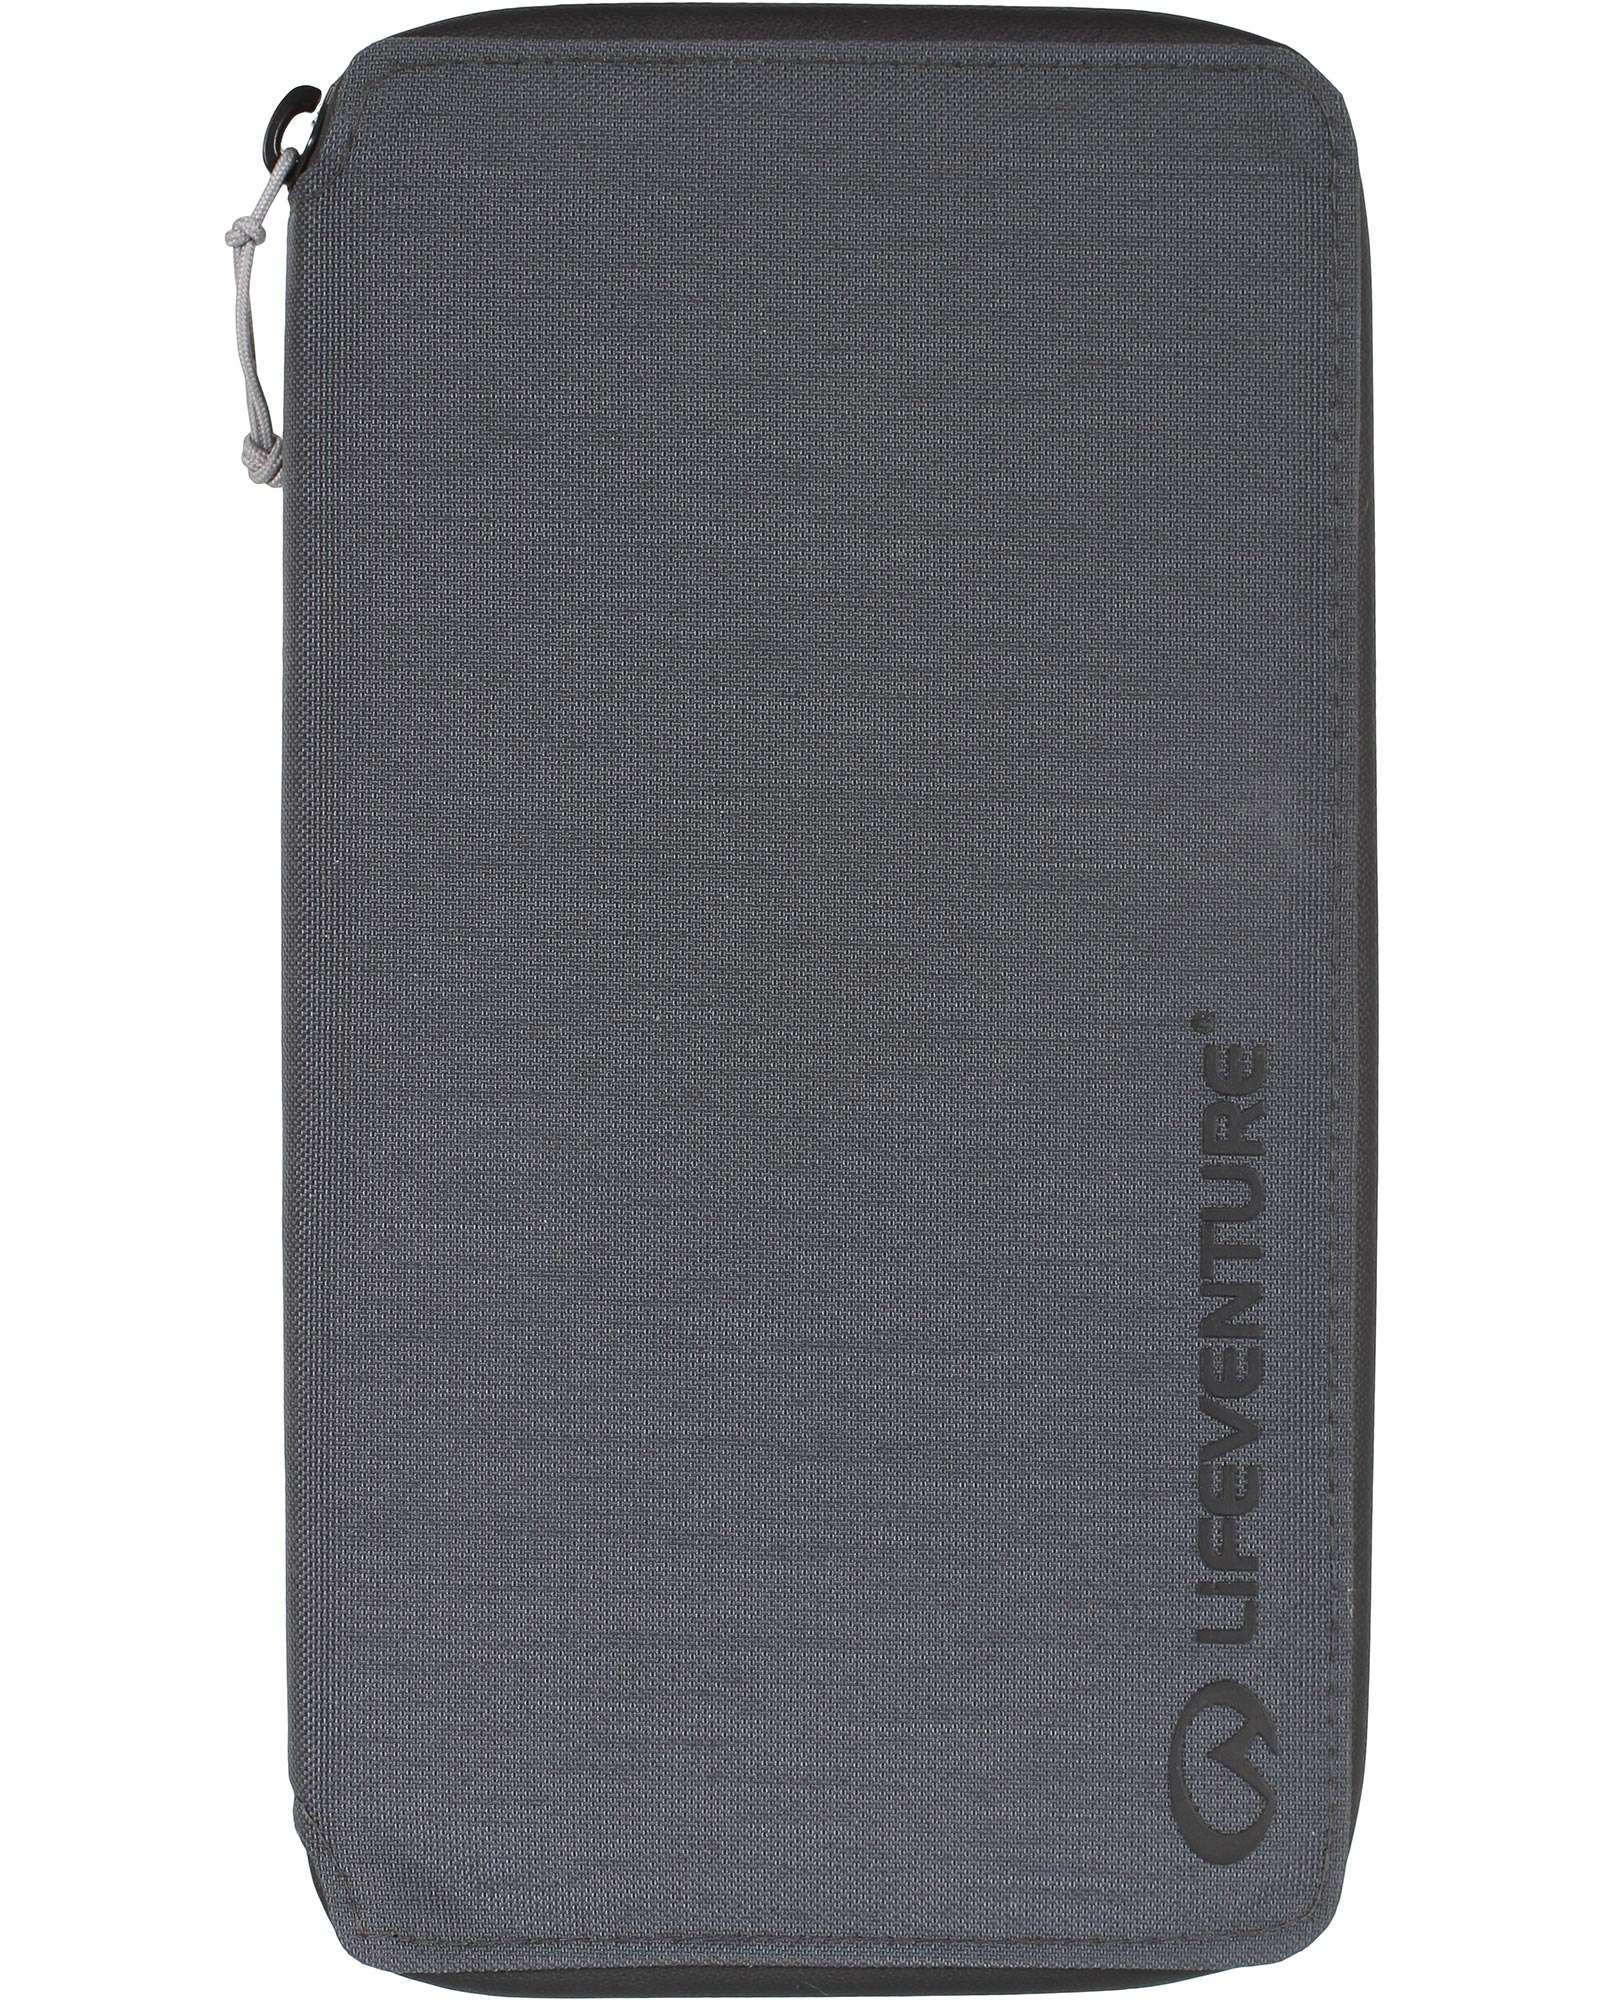 Product image of Lifeventure RFiD Travel Wallet - Recycled